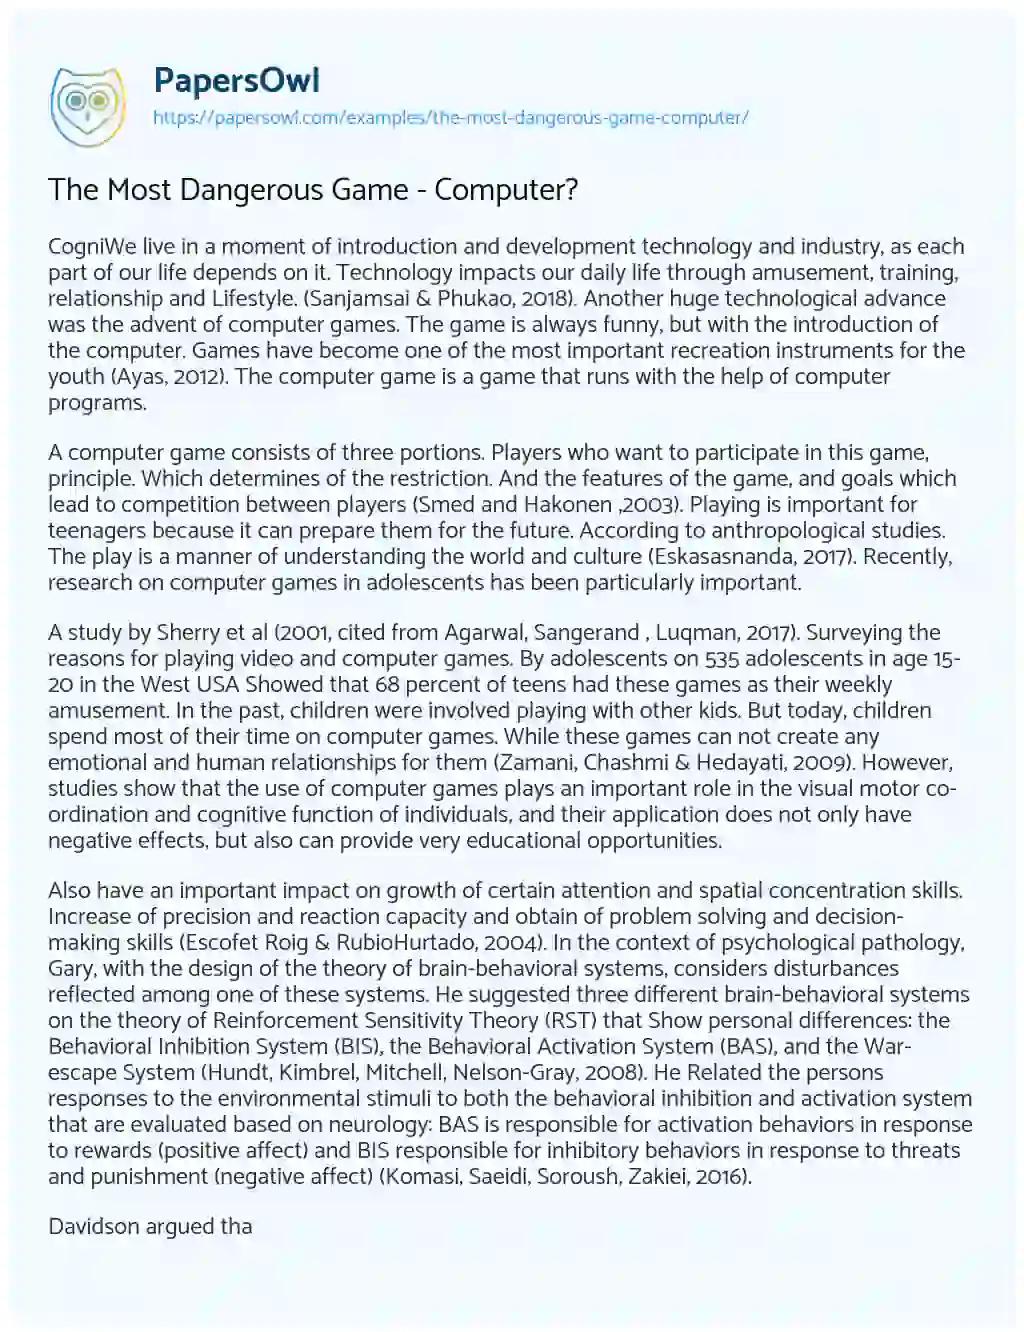 Essay on The most Dangerous Game – Computer?